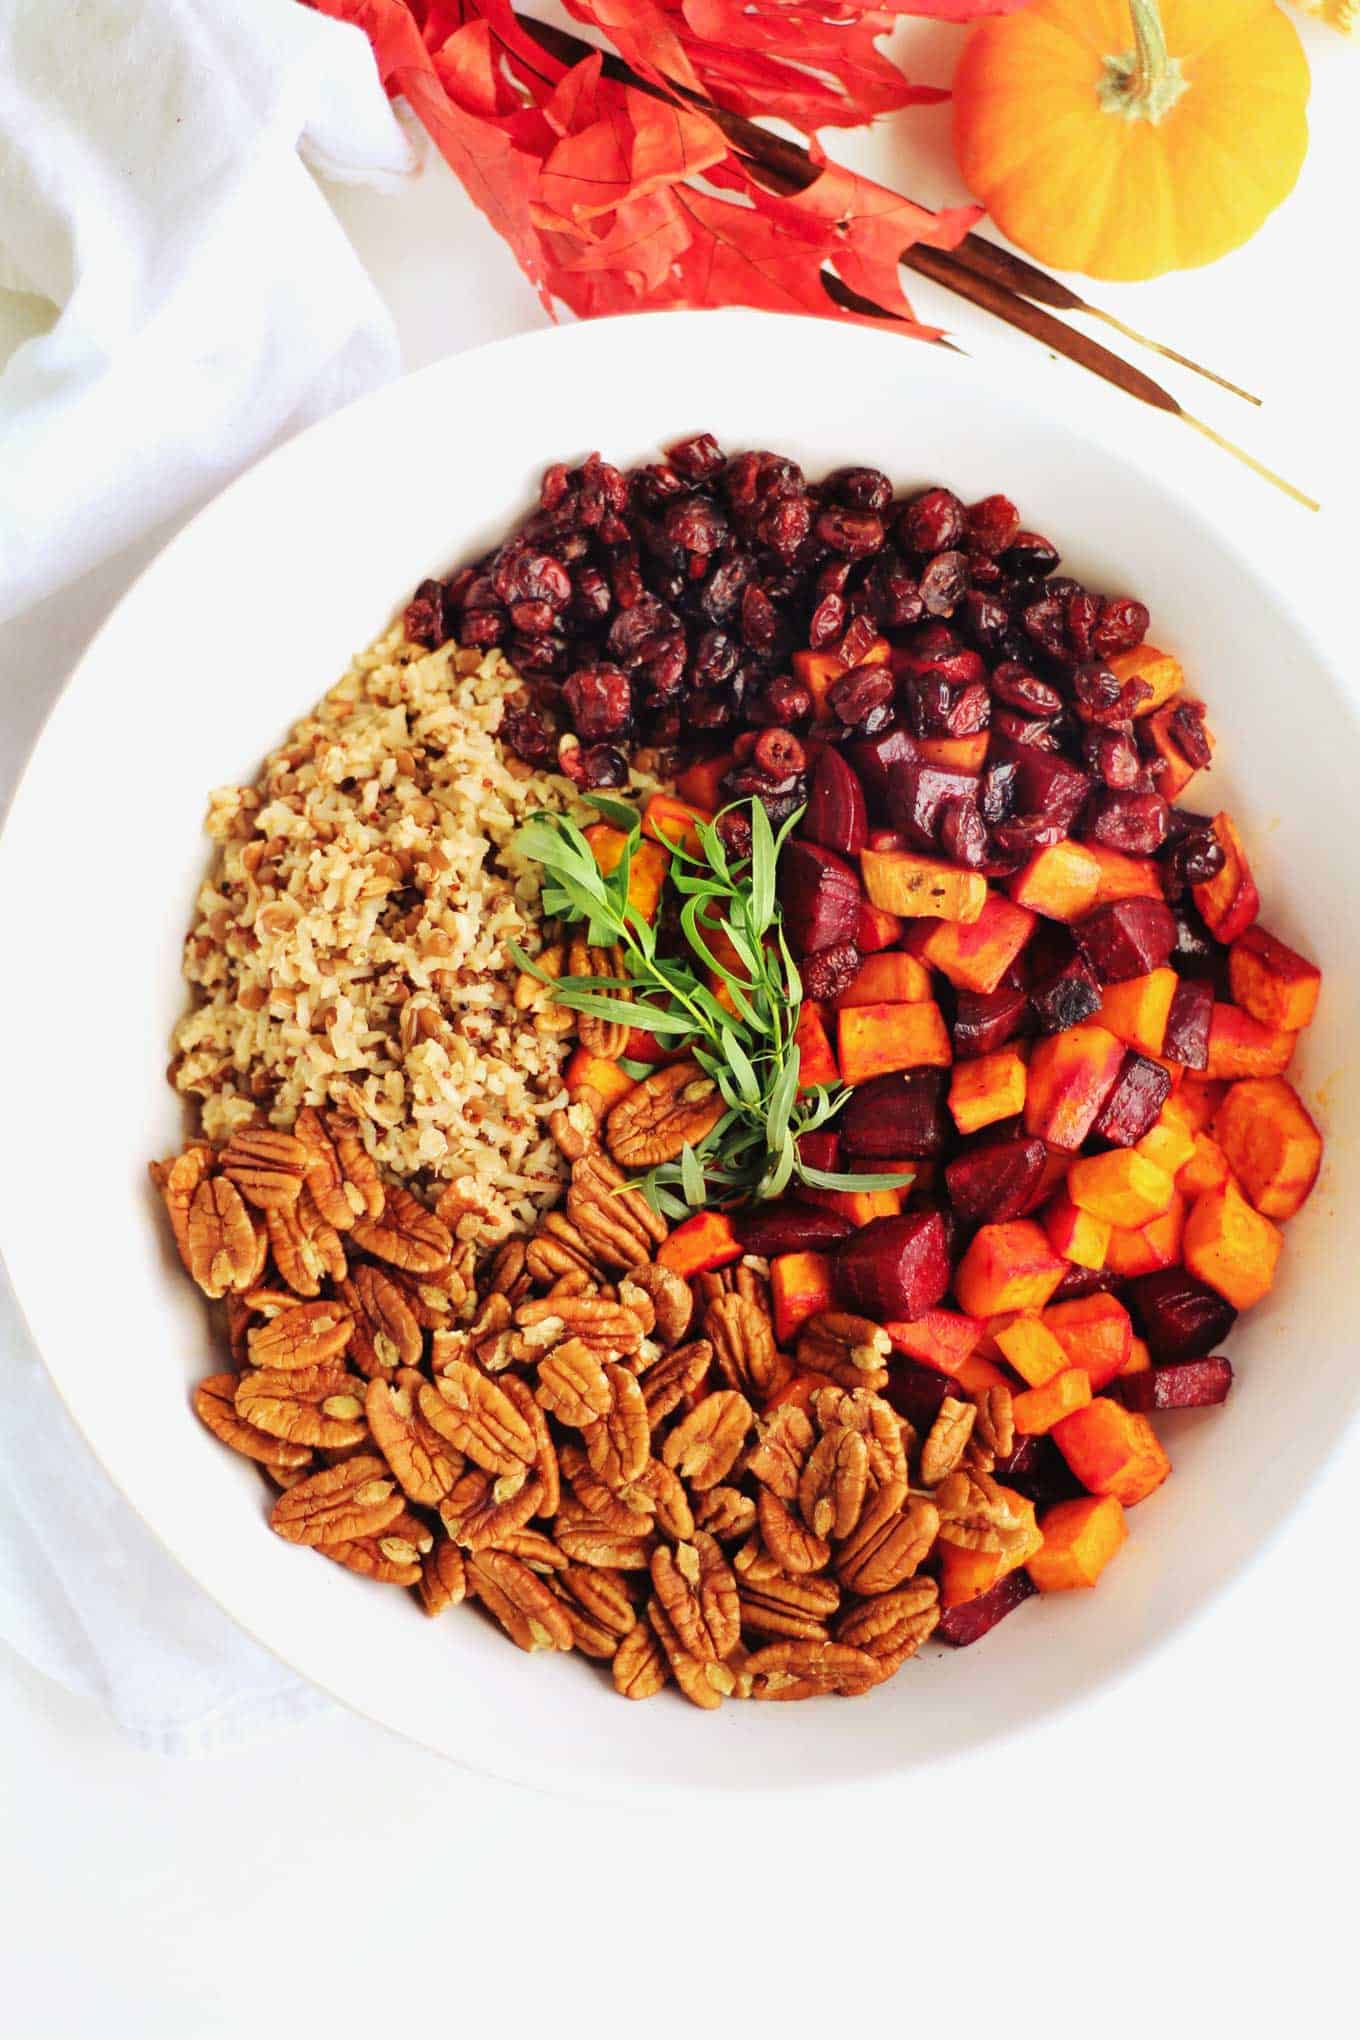 A photo of a root vegetable fall wild rice salad in a white bowl